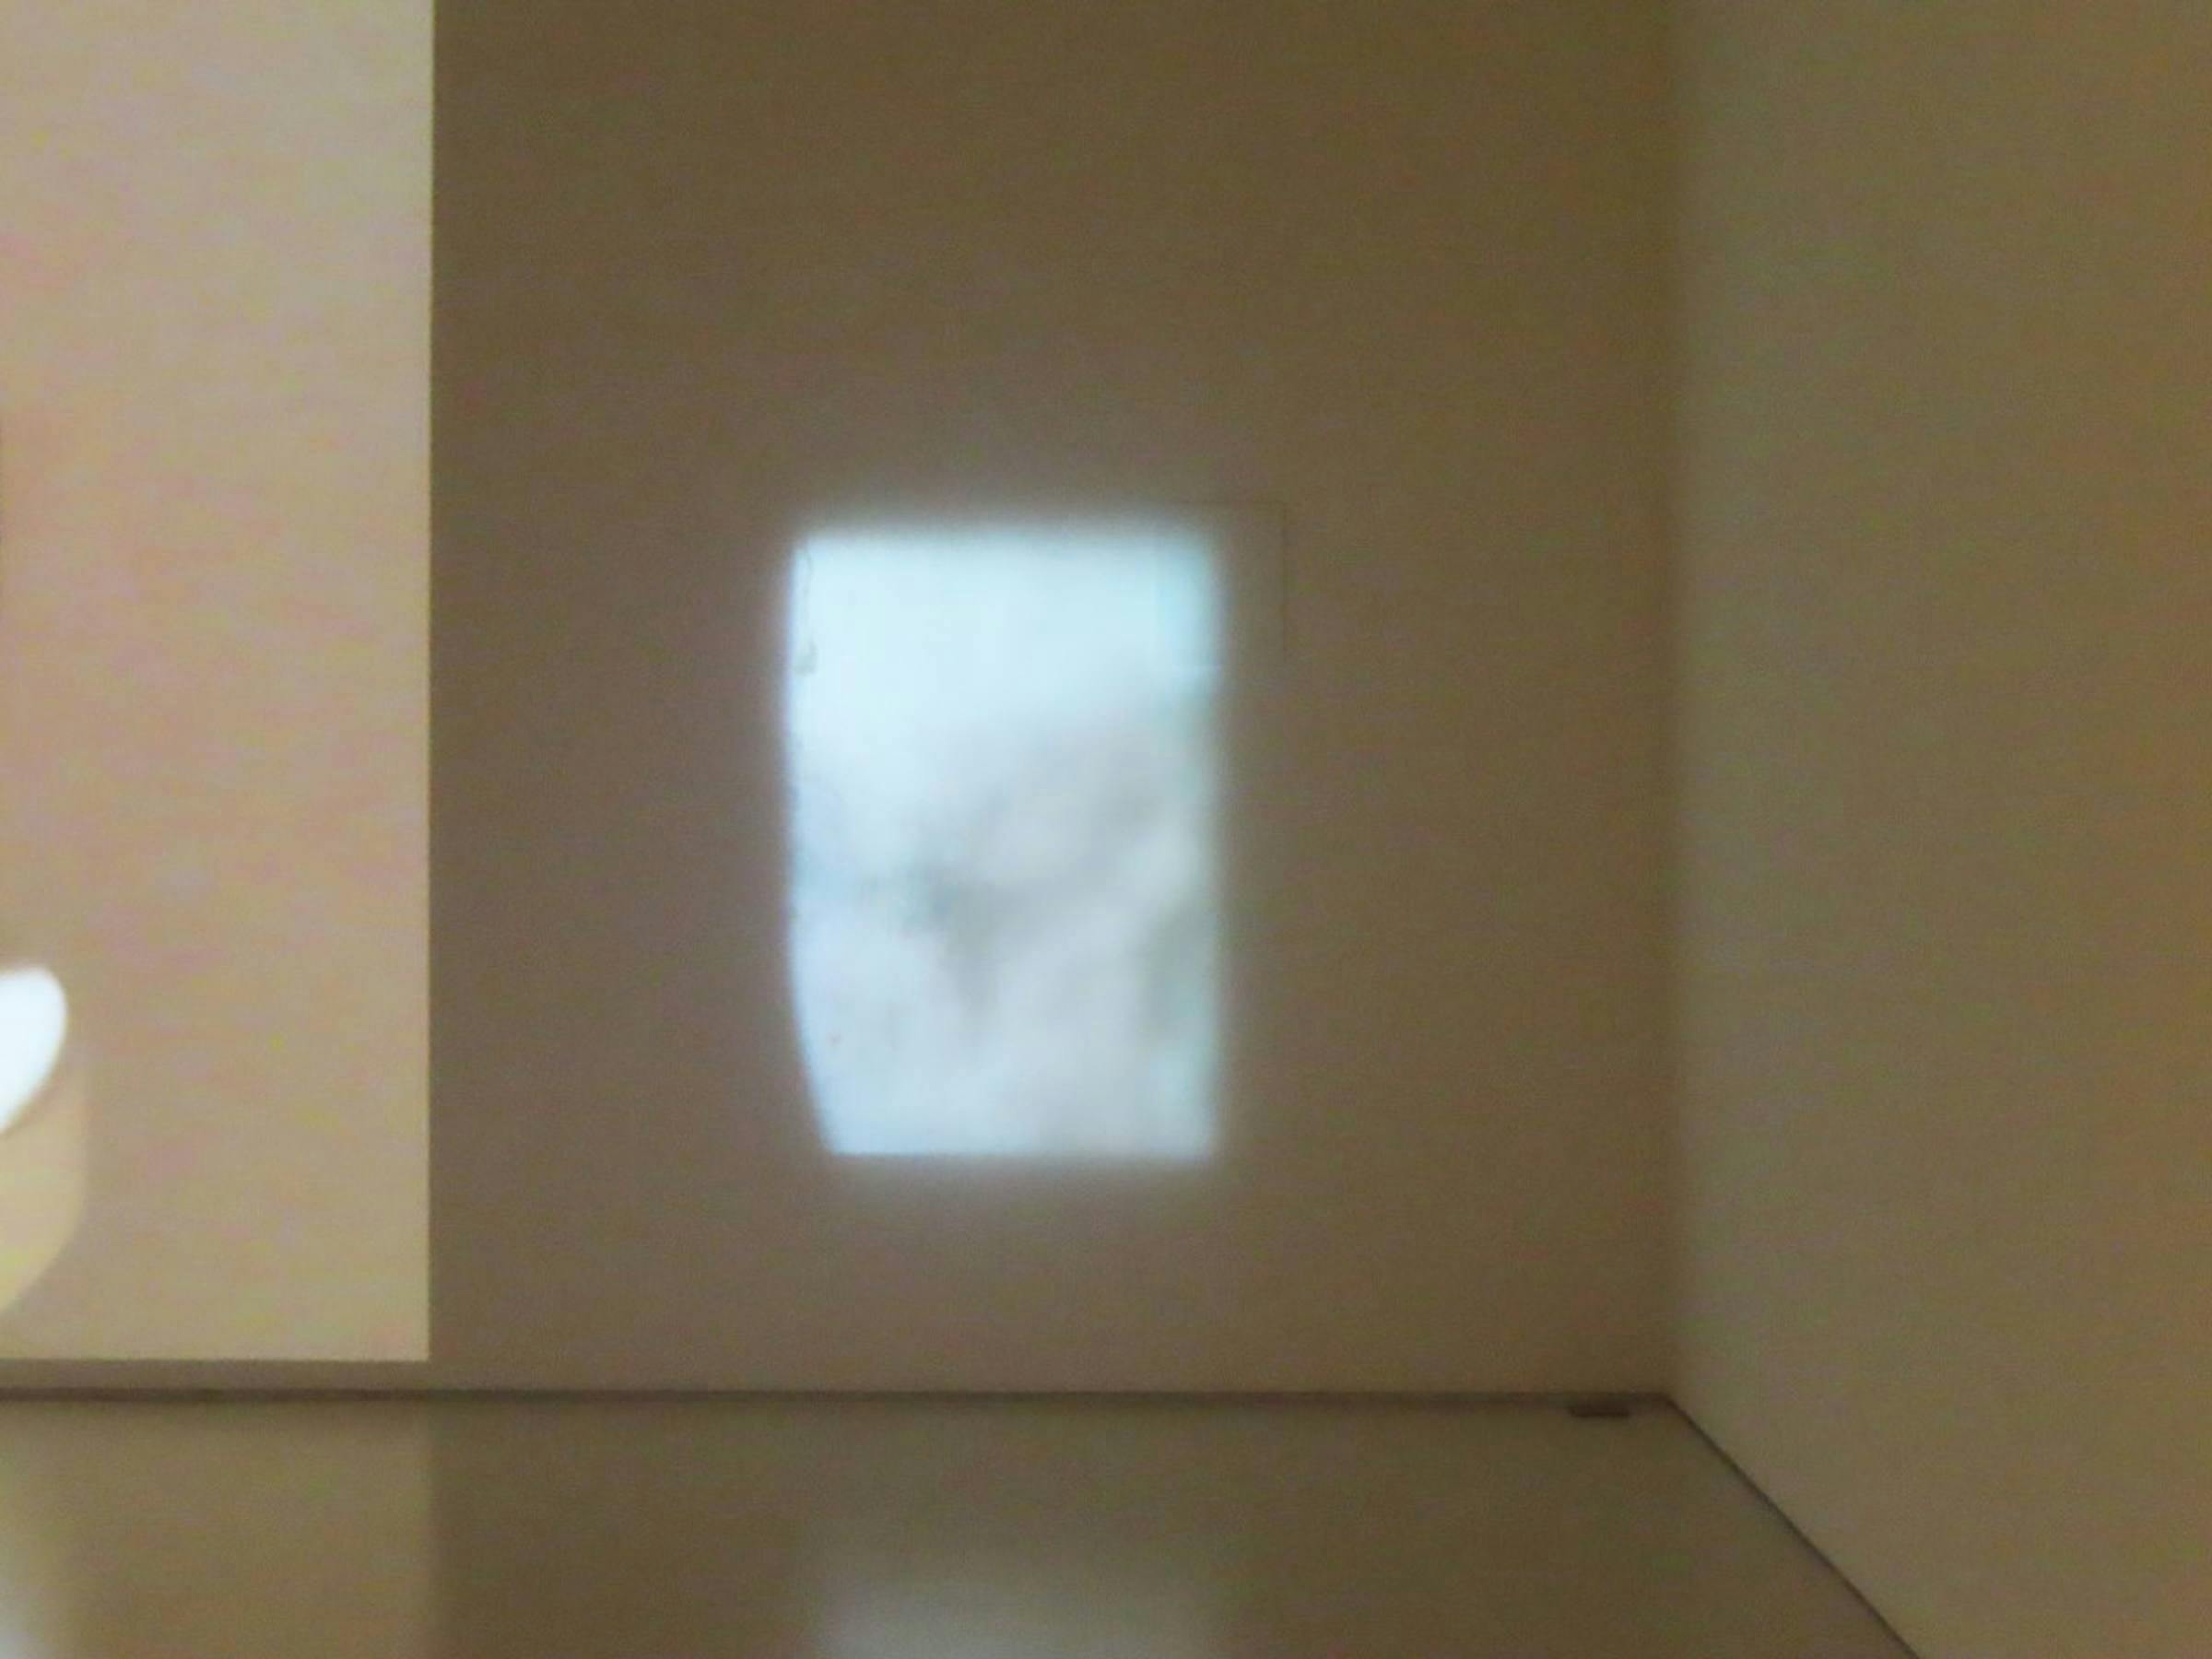 Image of a textured white square projected onto a pale wall in a gallery space.